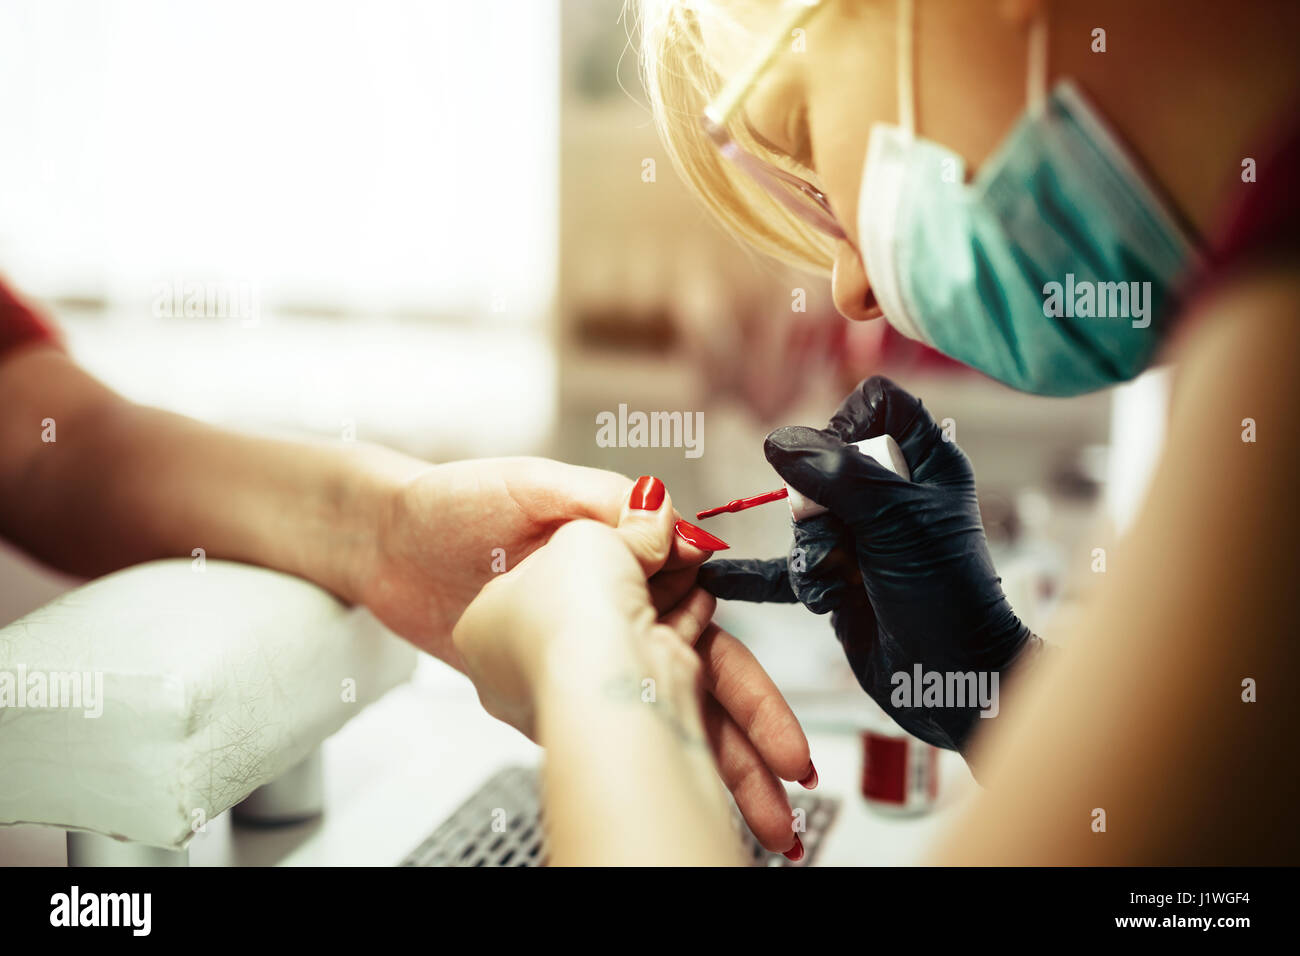 Woman at beauty salon receiving manicure and nail treatment Stock Photo